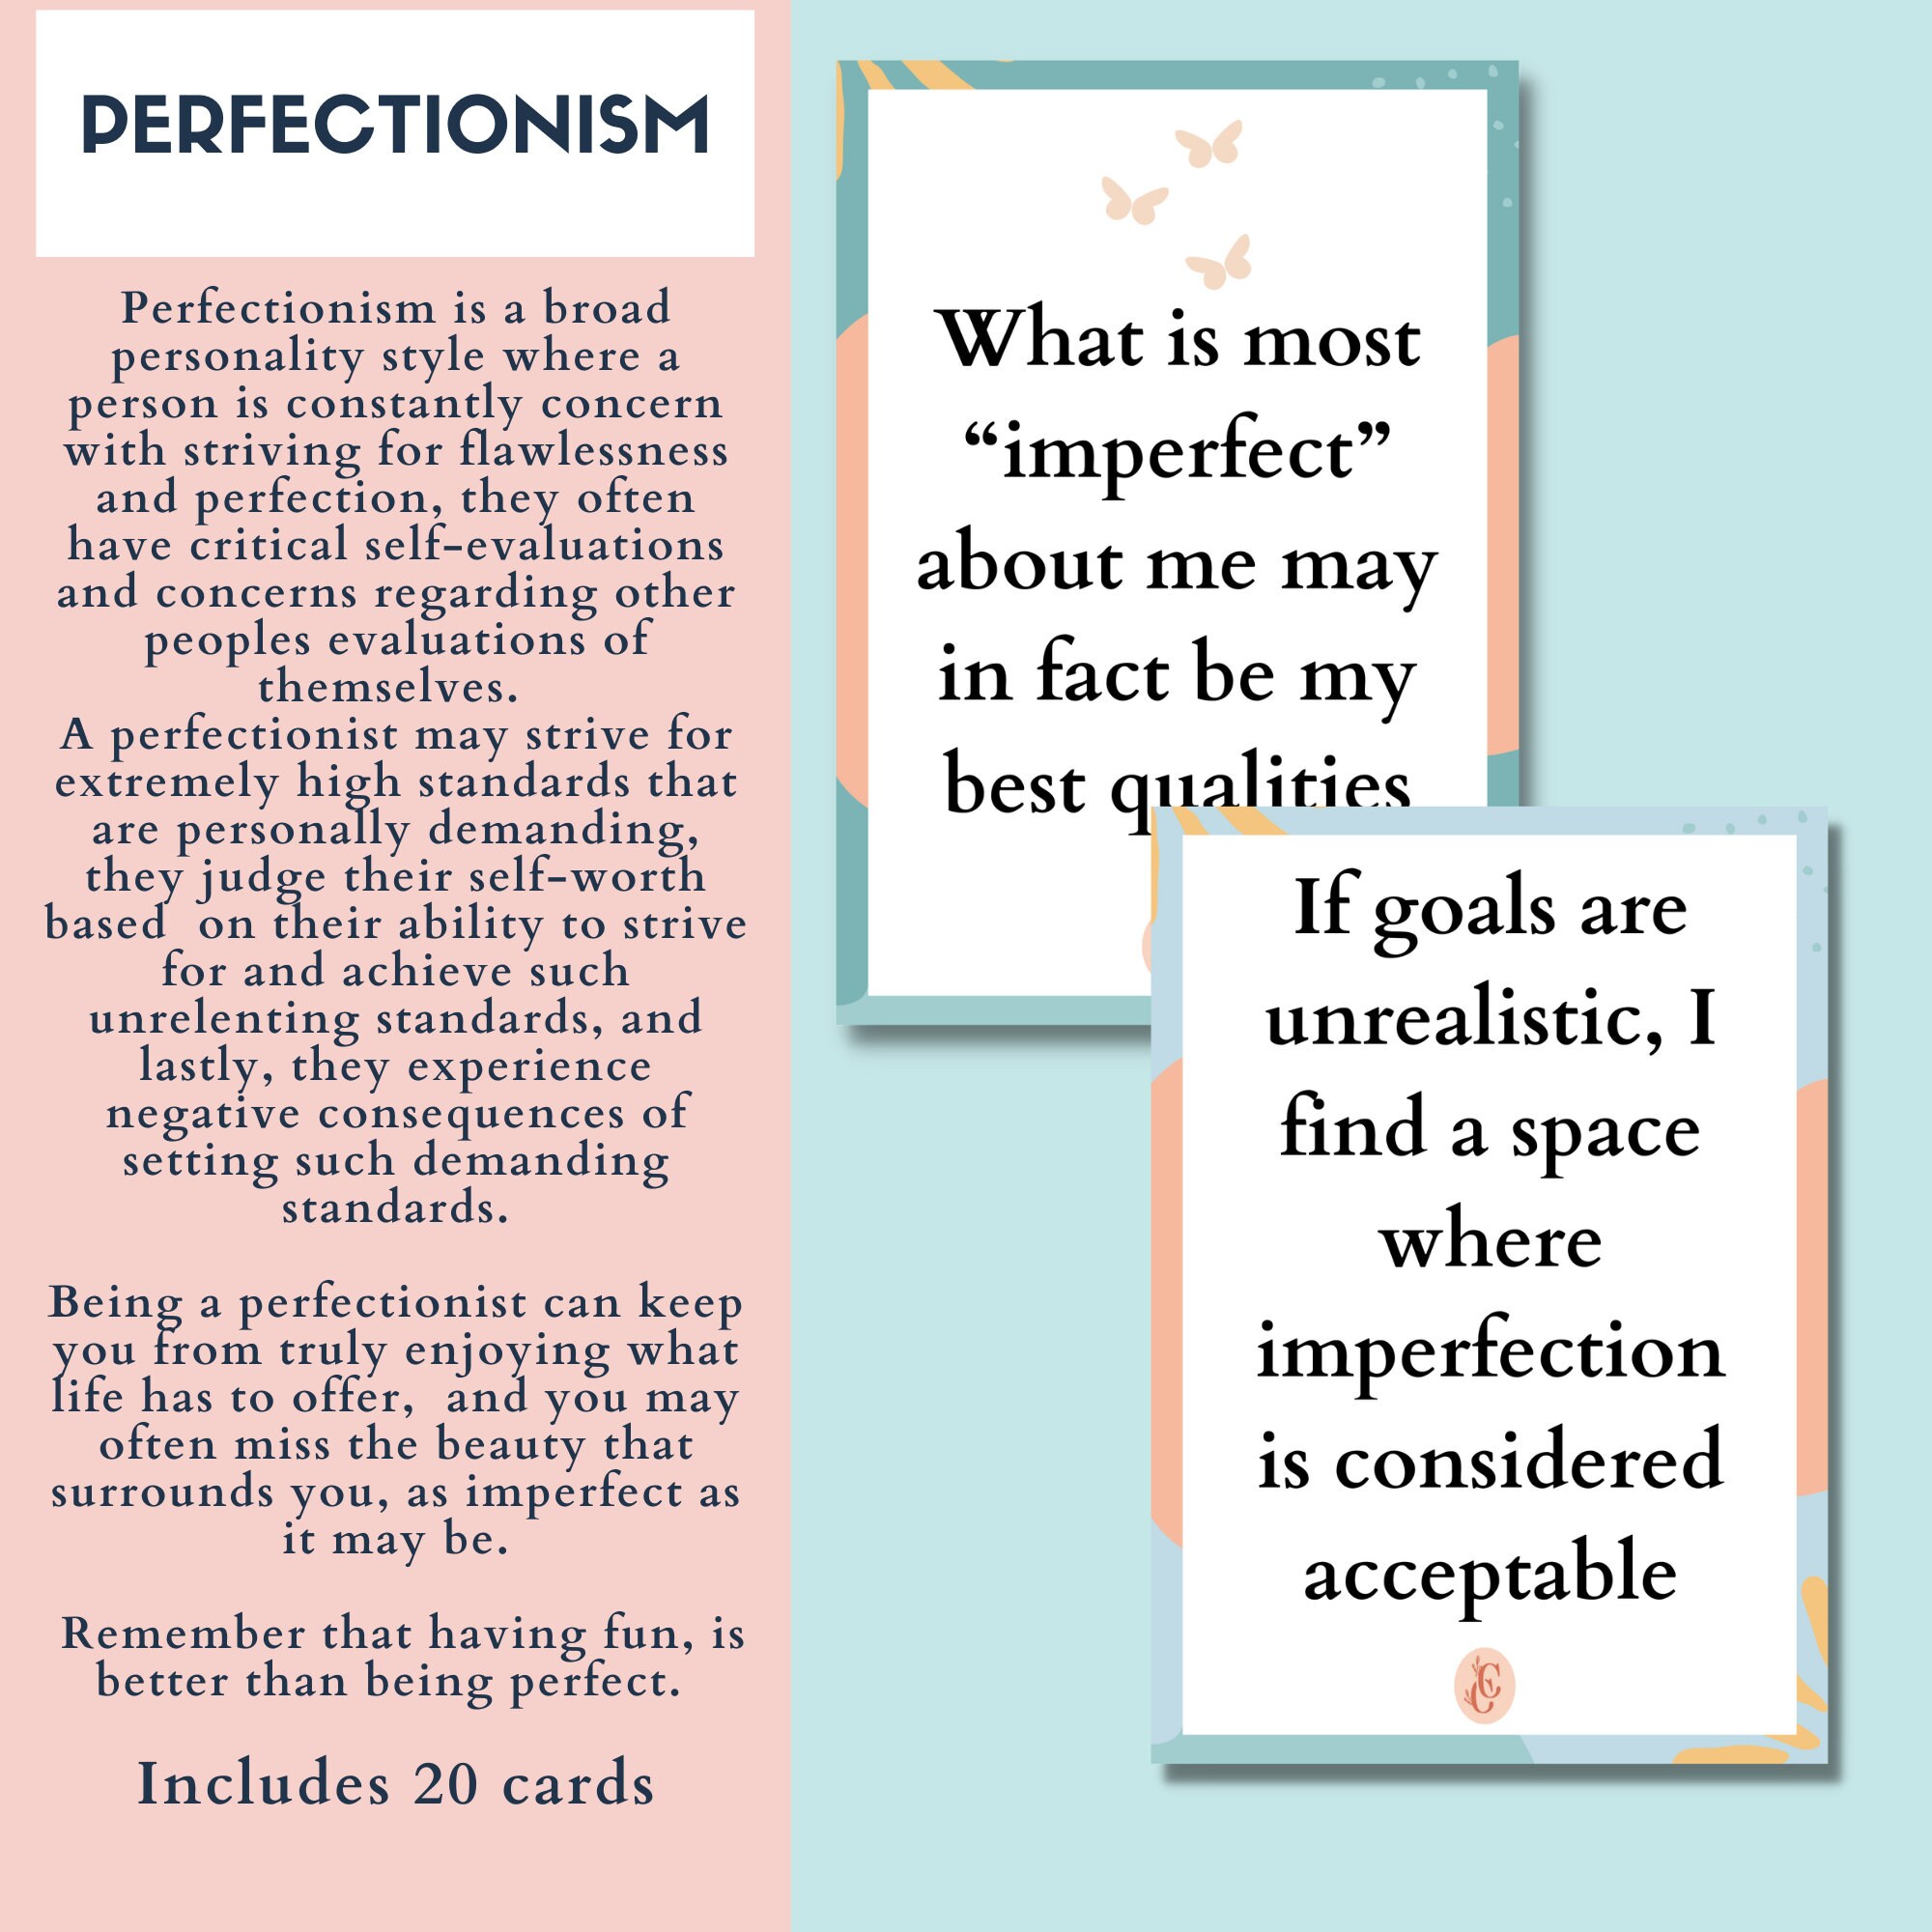 Does Perfectionism Smother Fulfillment?